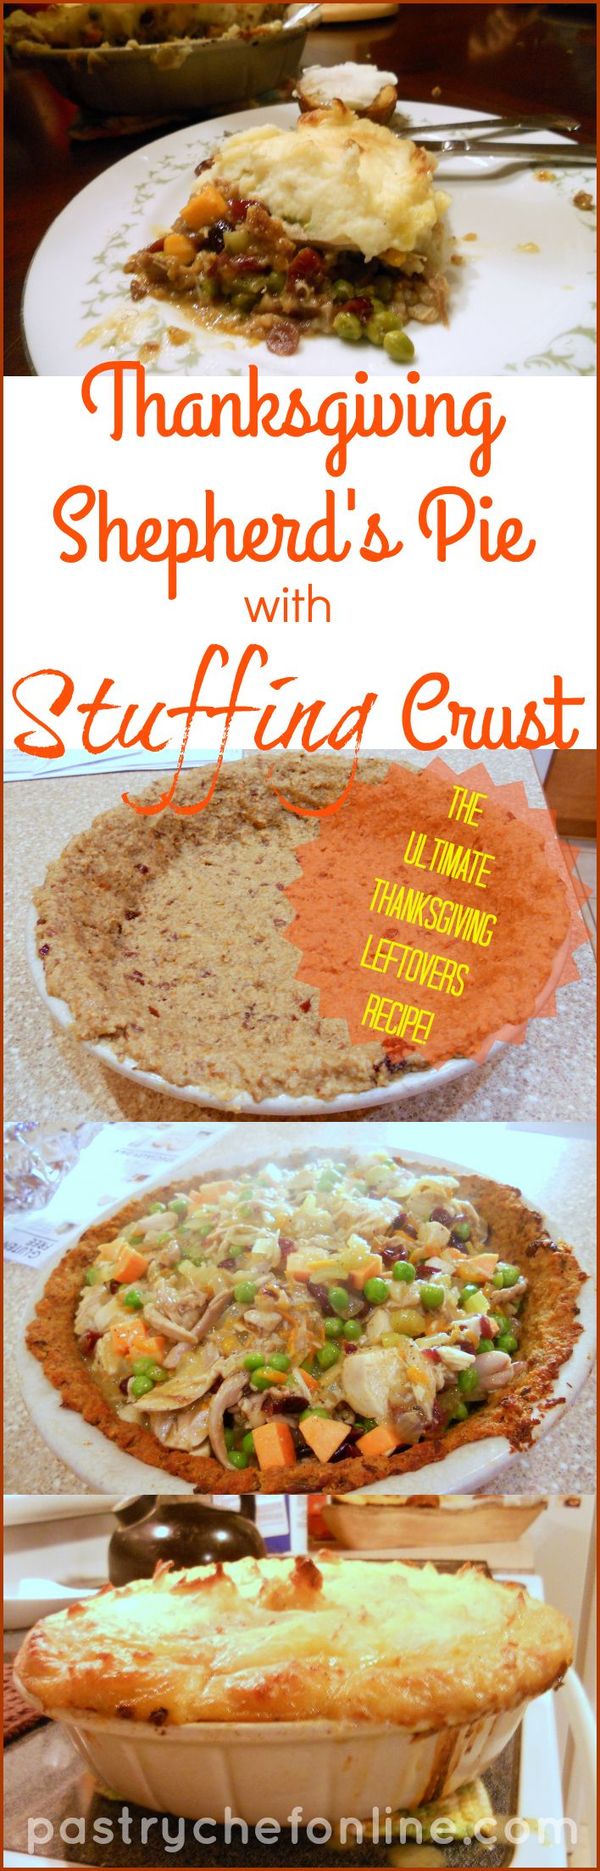 Thanksgiving Shepherd's Pie with Stuffing Crust